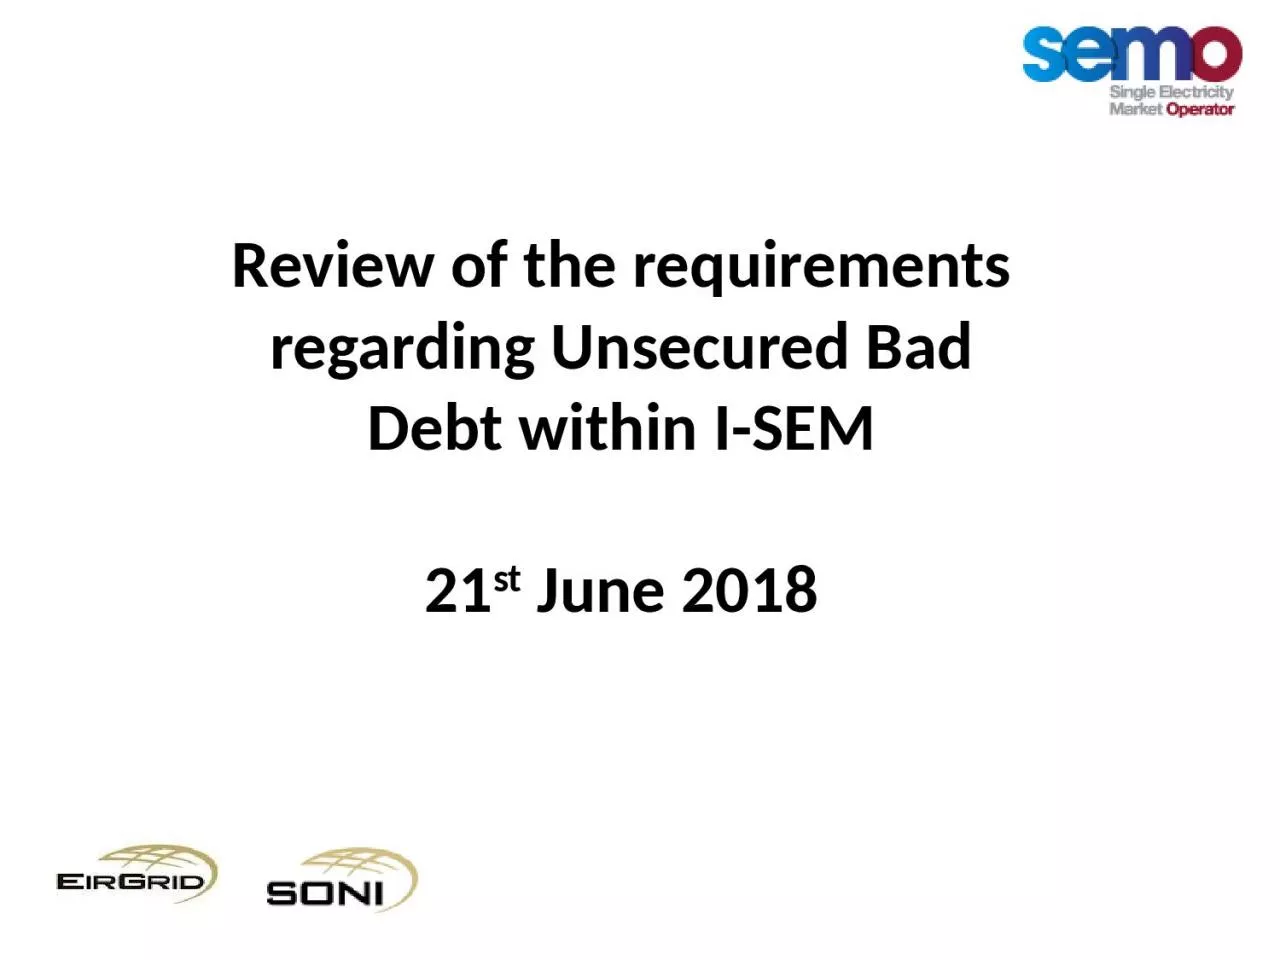 Review of the requirements regarding Unsecured Bad Debt within I-SEM